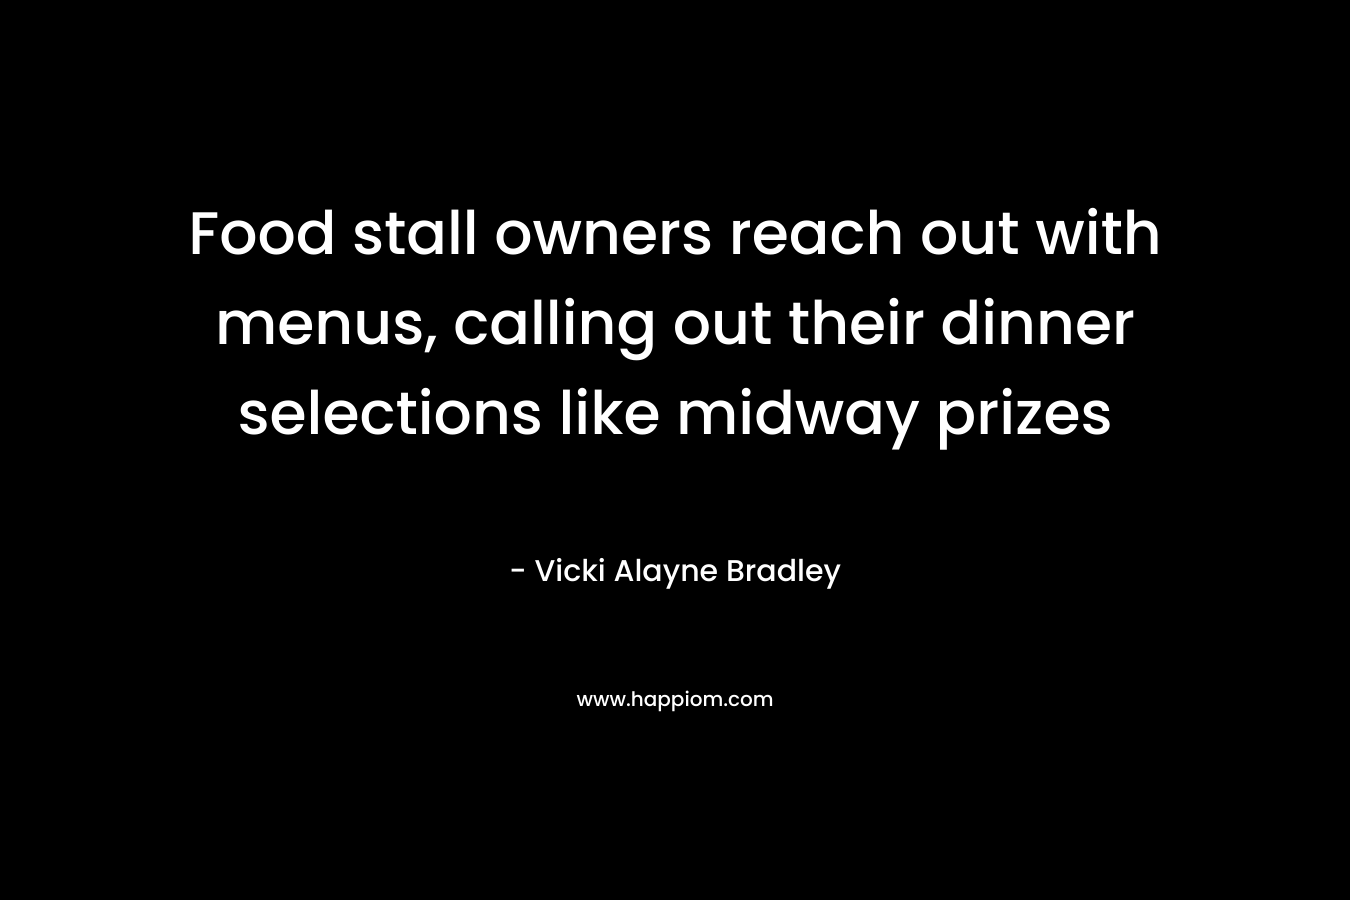 Food stall owners reach out with menus, calling out their dinner selections like midway prizes – Vicki Alayne Bradley